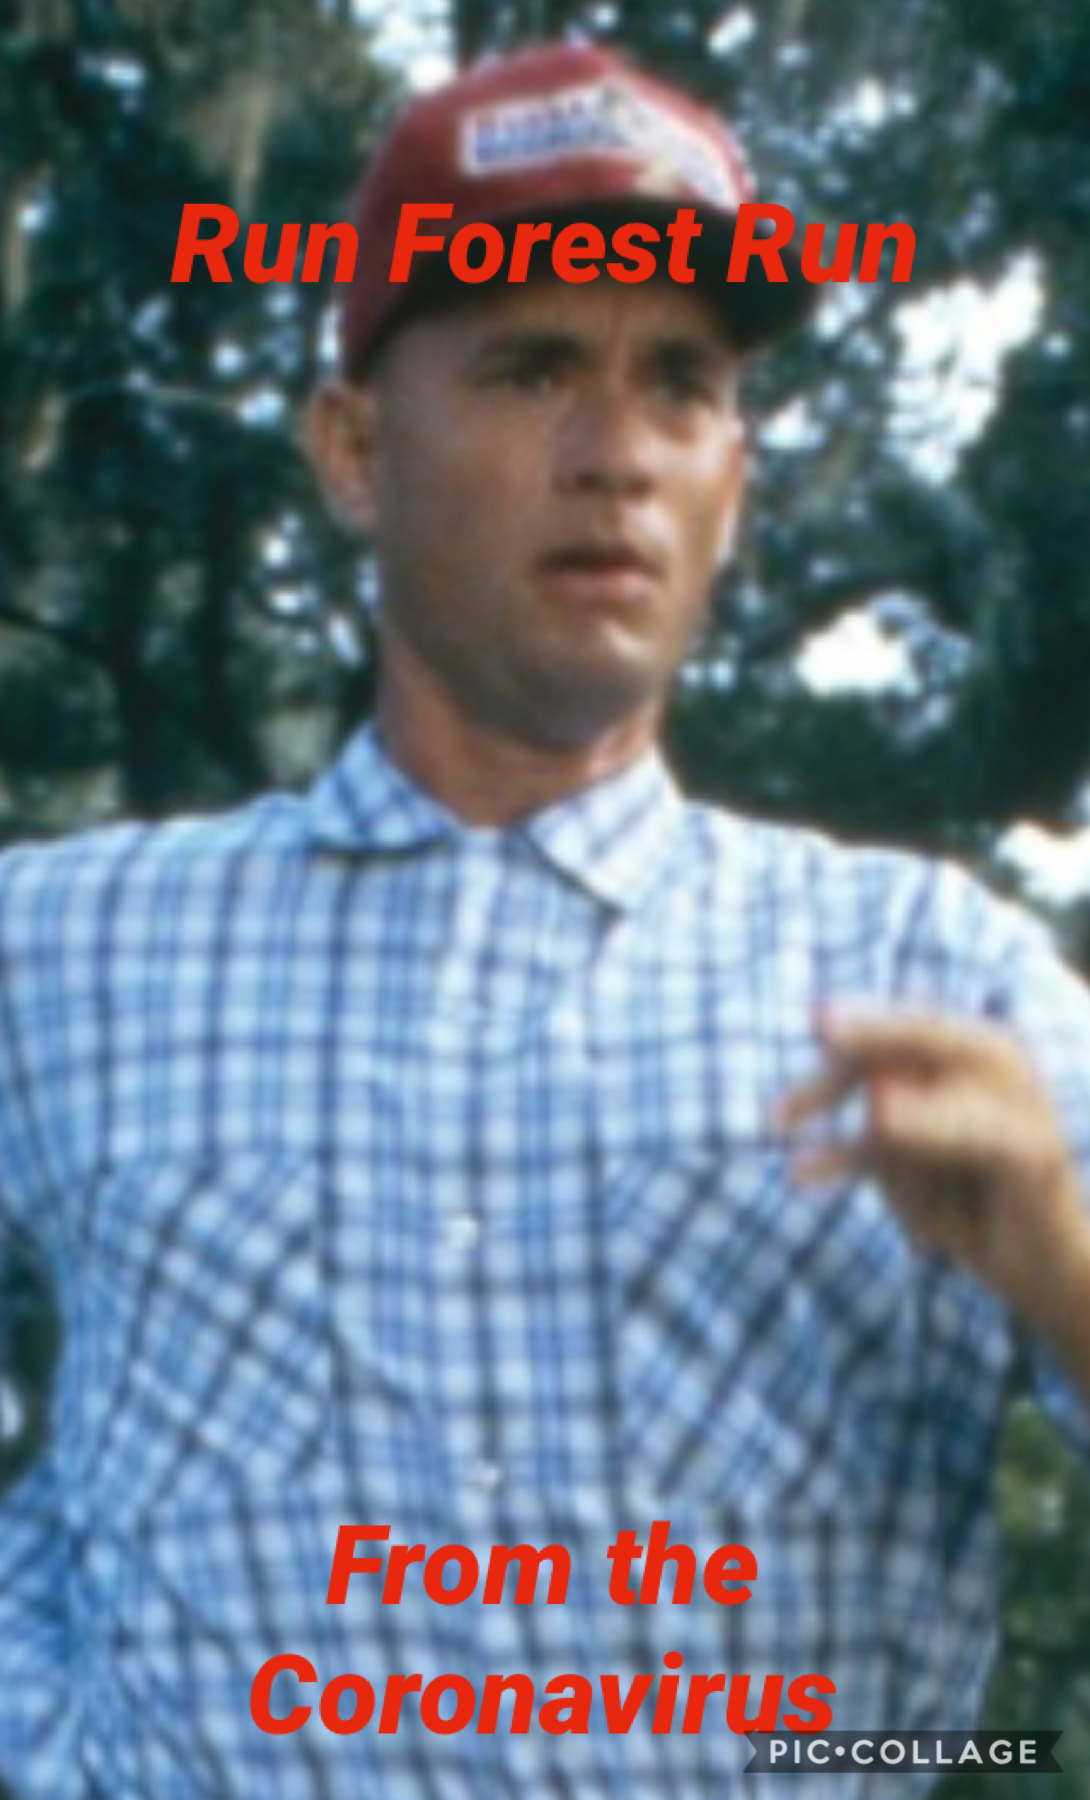 The actor who played Forest Gump has the coronavirus